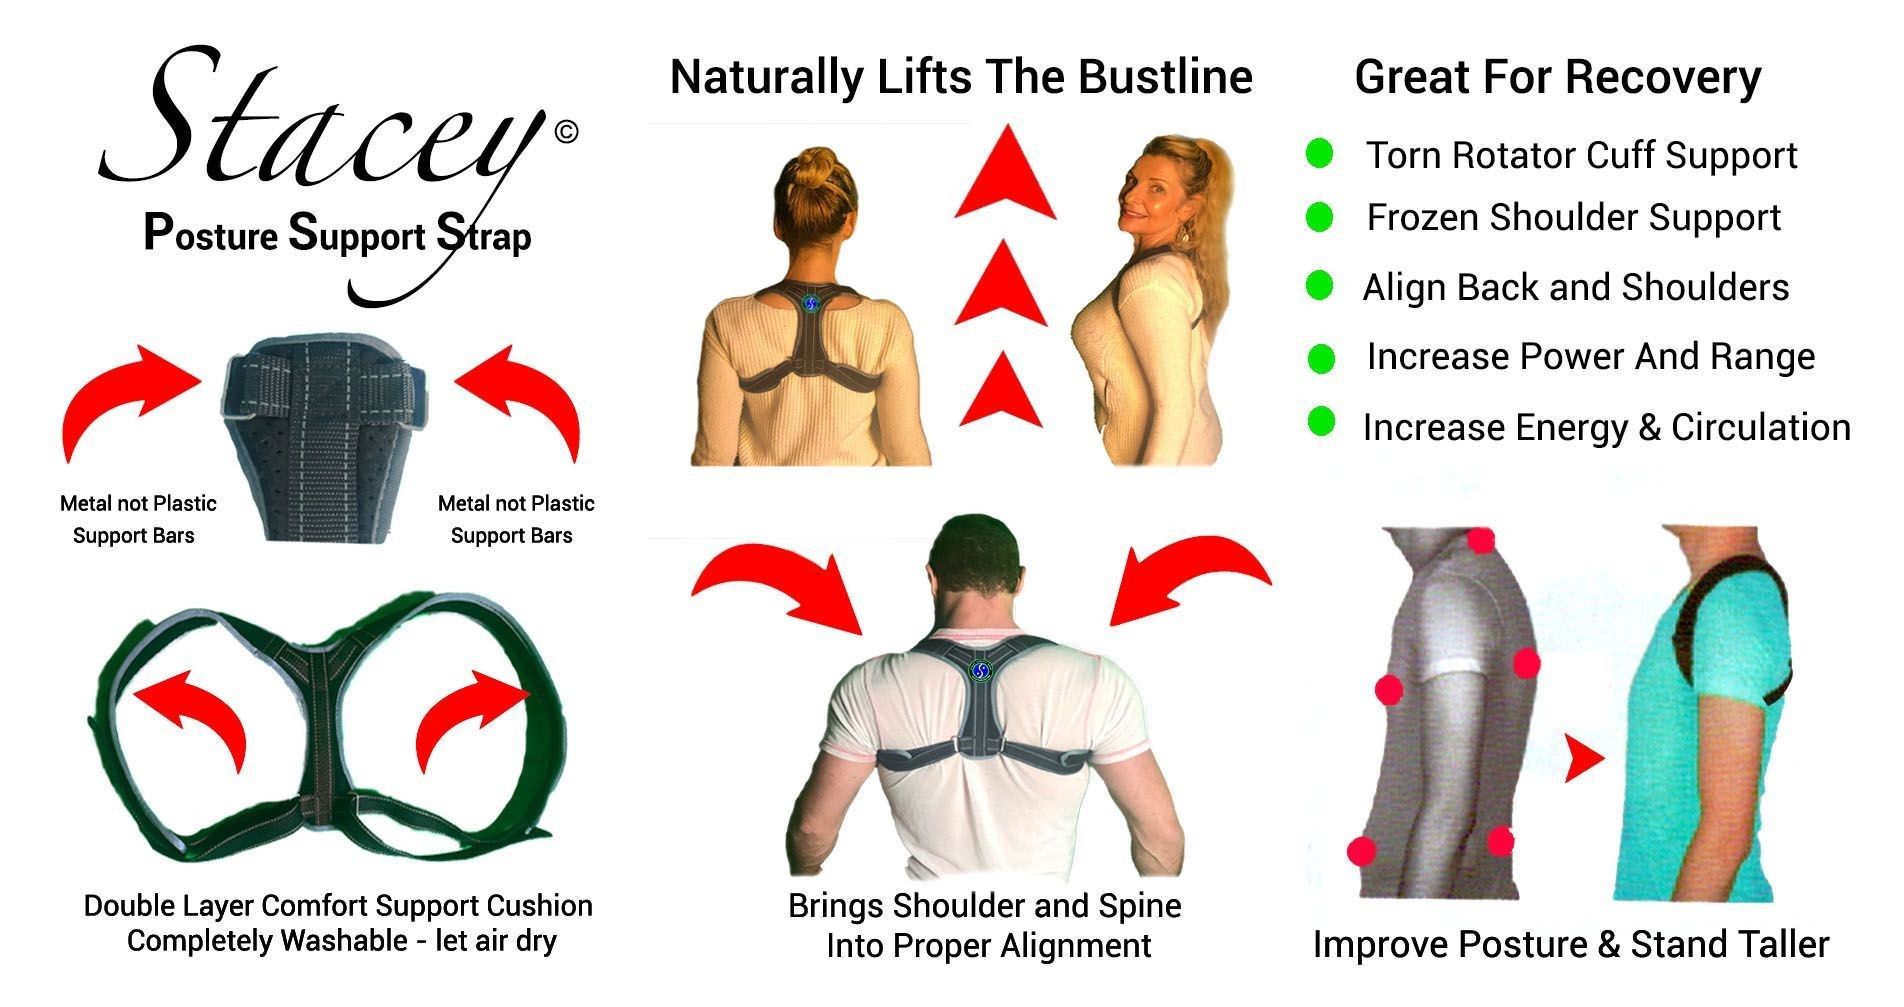 Stacey Posture Support Strap brochure showing how it immediately improves posture